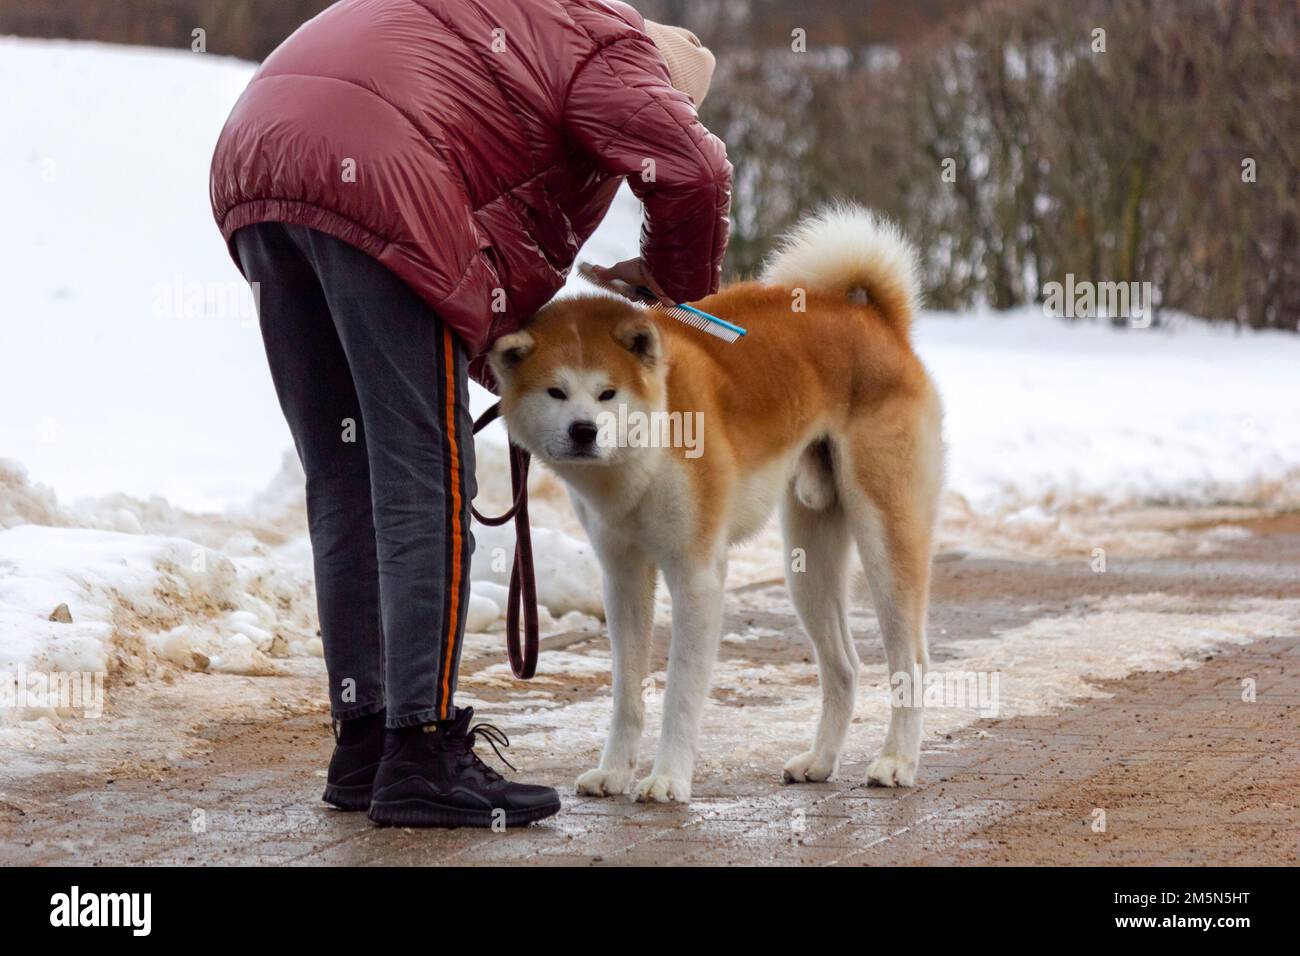 Japanese Akita dog on a winter background. Red dog being brushed by a woman Stock Photo